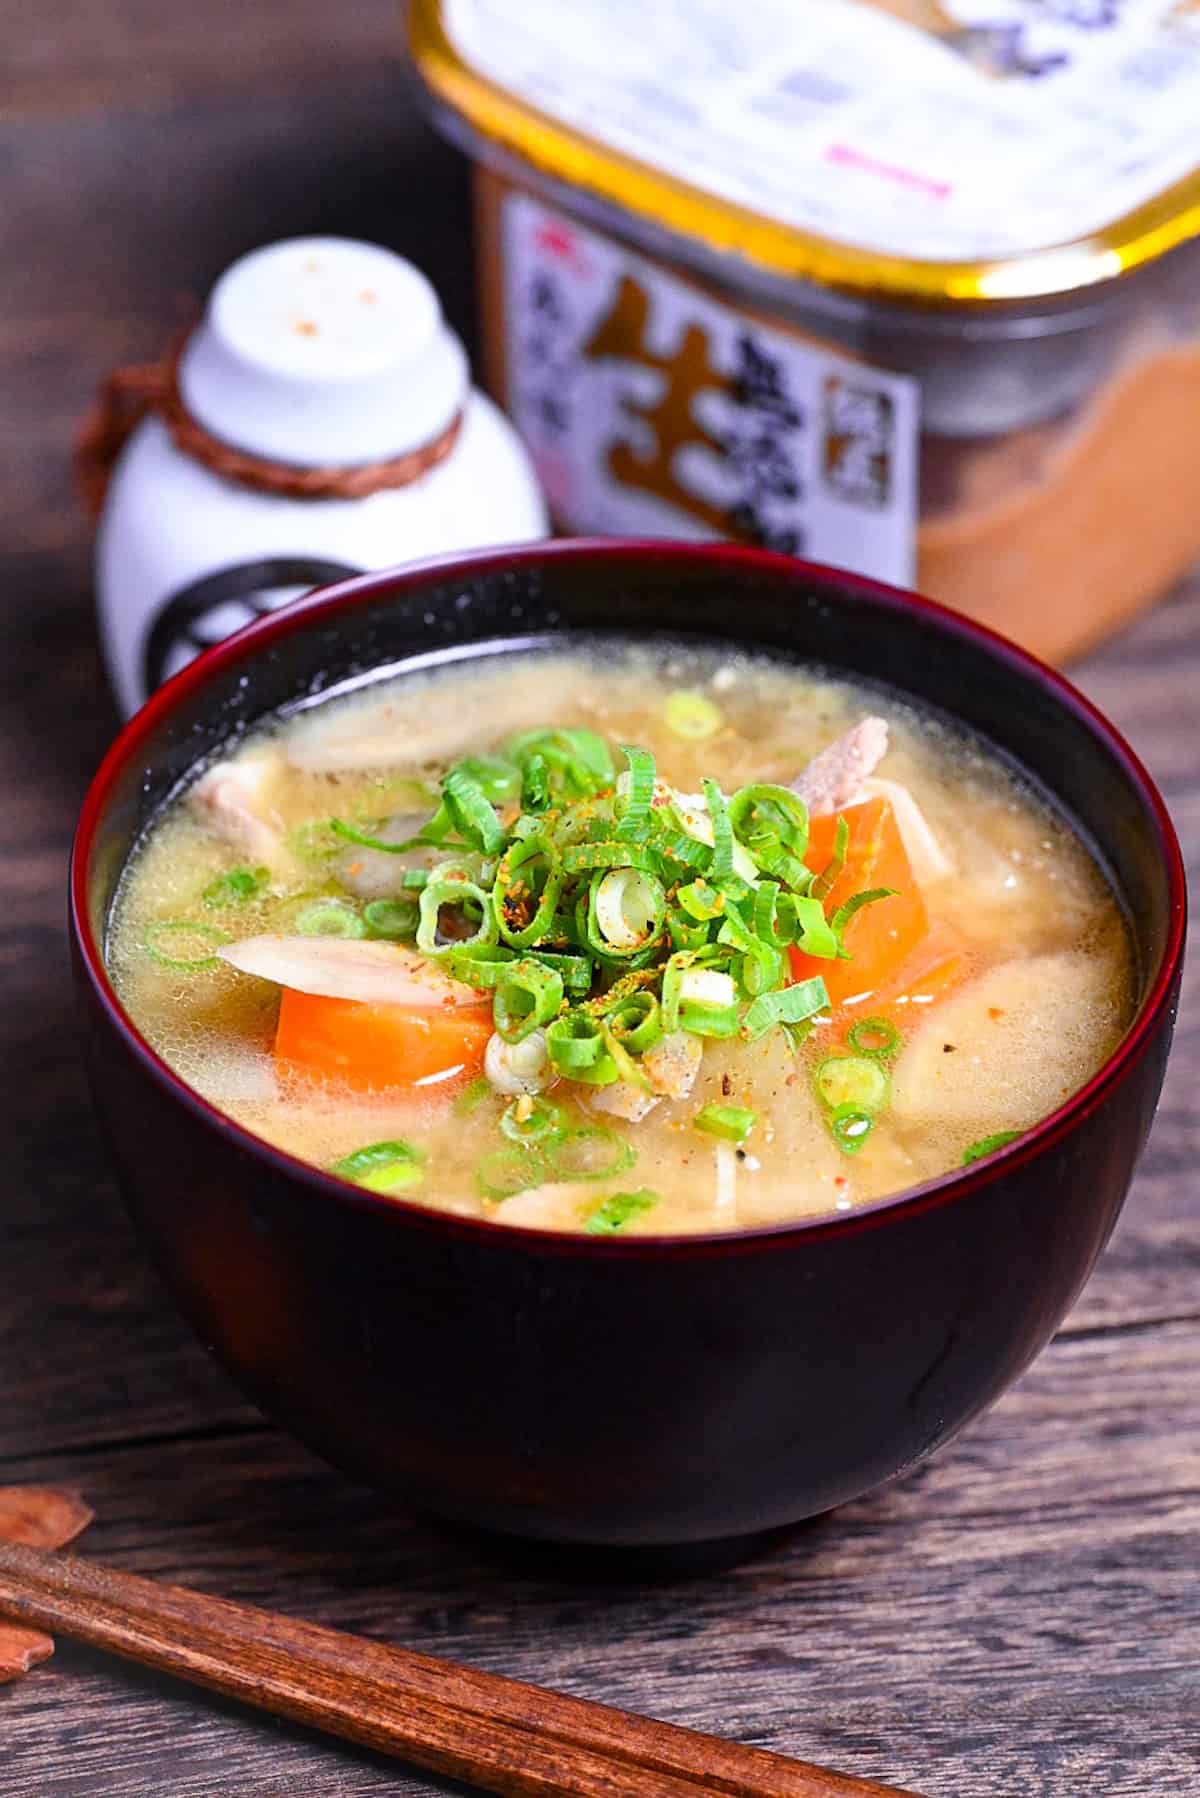 Japanese "Tonjiru" pork miso soup in a black and red bowl topped with shichimi togarashi (chili powder) and green onions